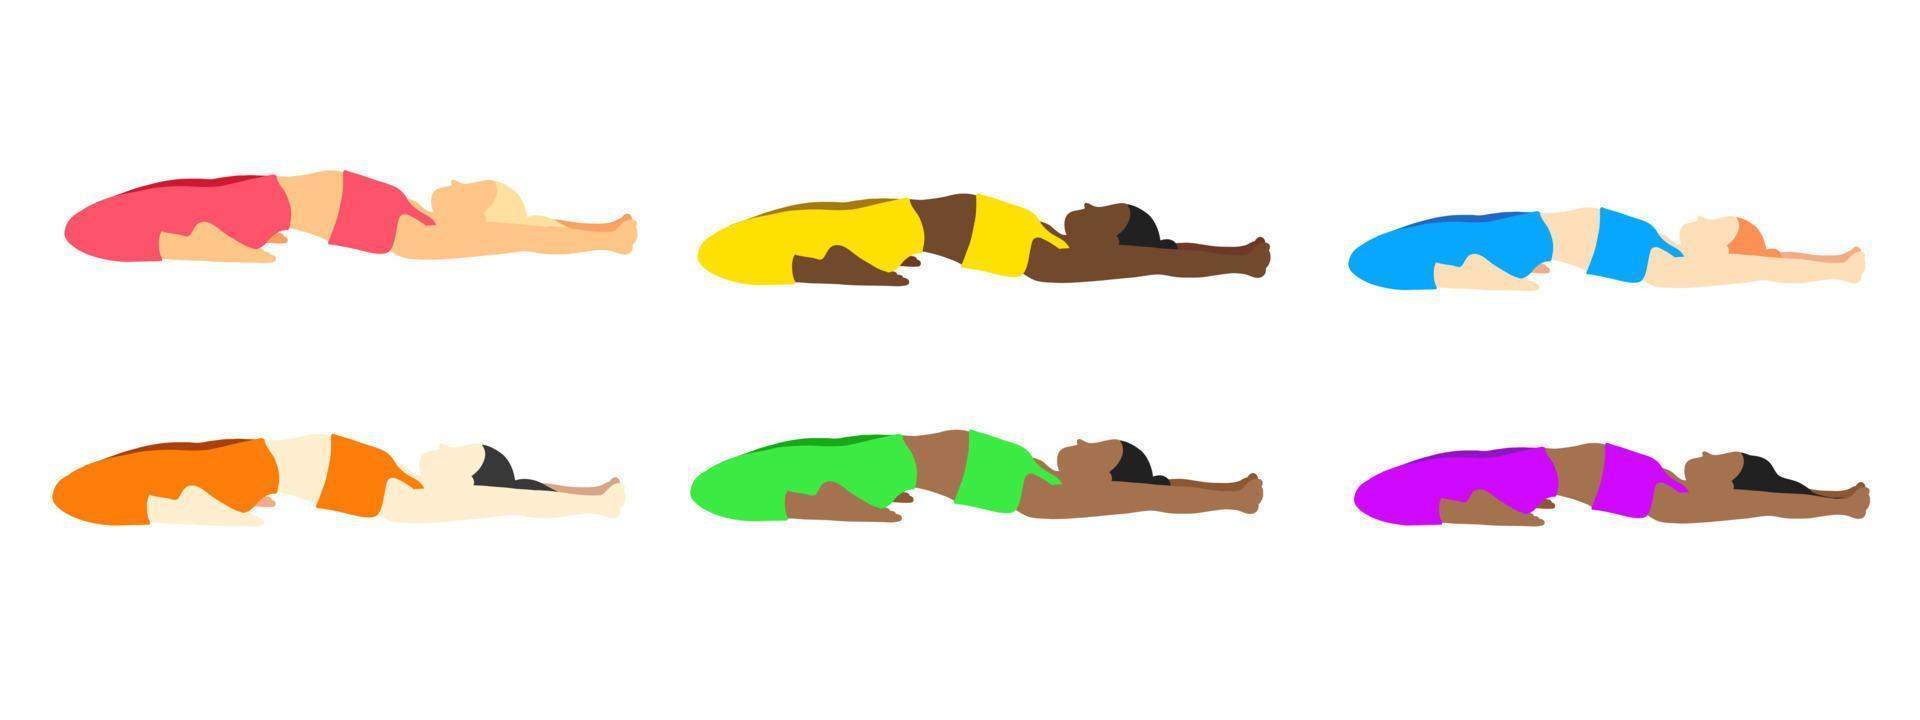 Flexibility yoga poses collection. European, African, Asian female, lady, woman, girl. Pilates, mental health, training, gym. Vector illustration in cartoon flat style isolated on white background.